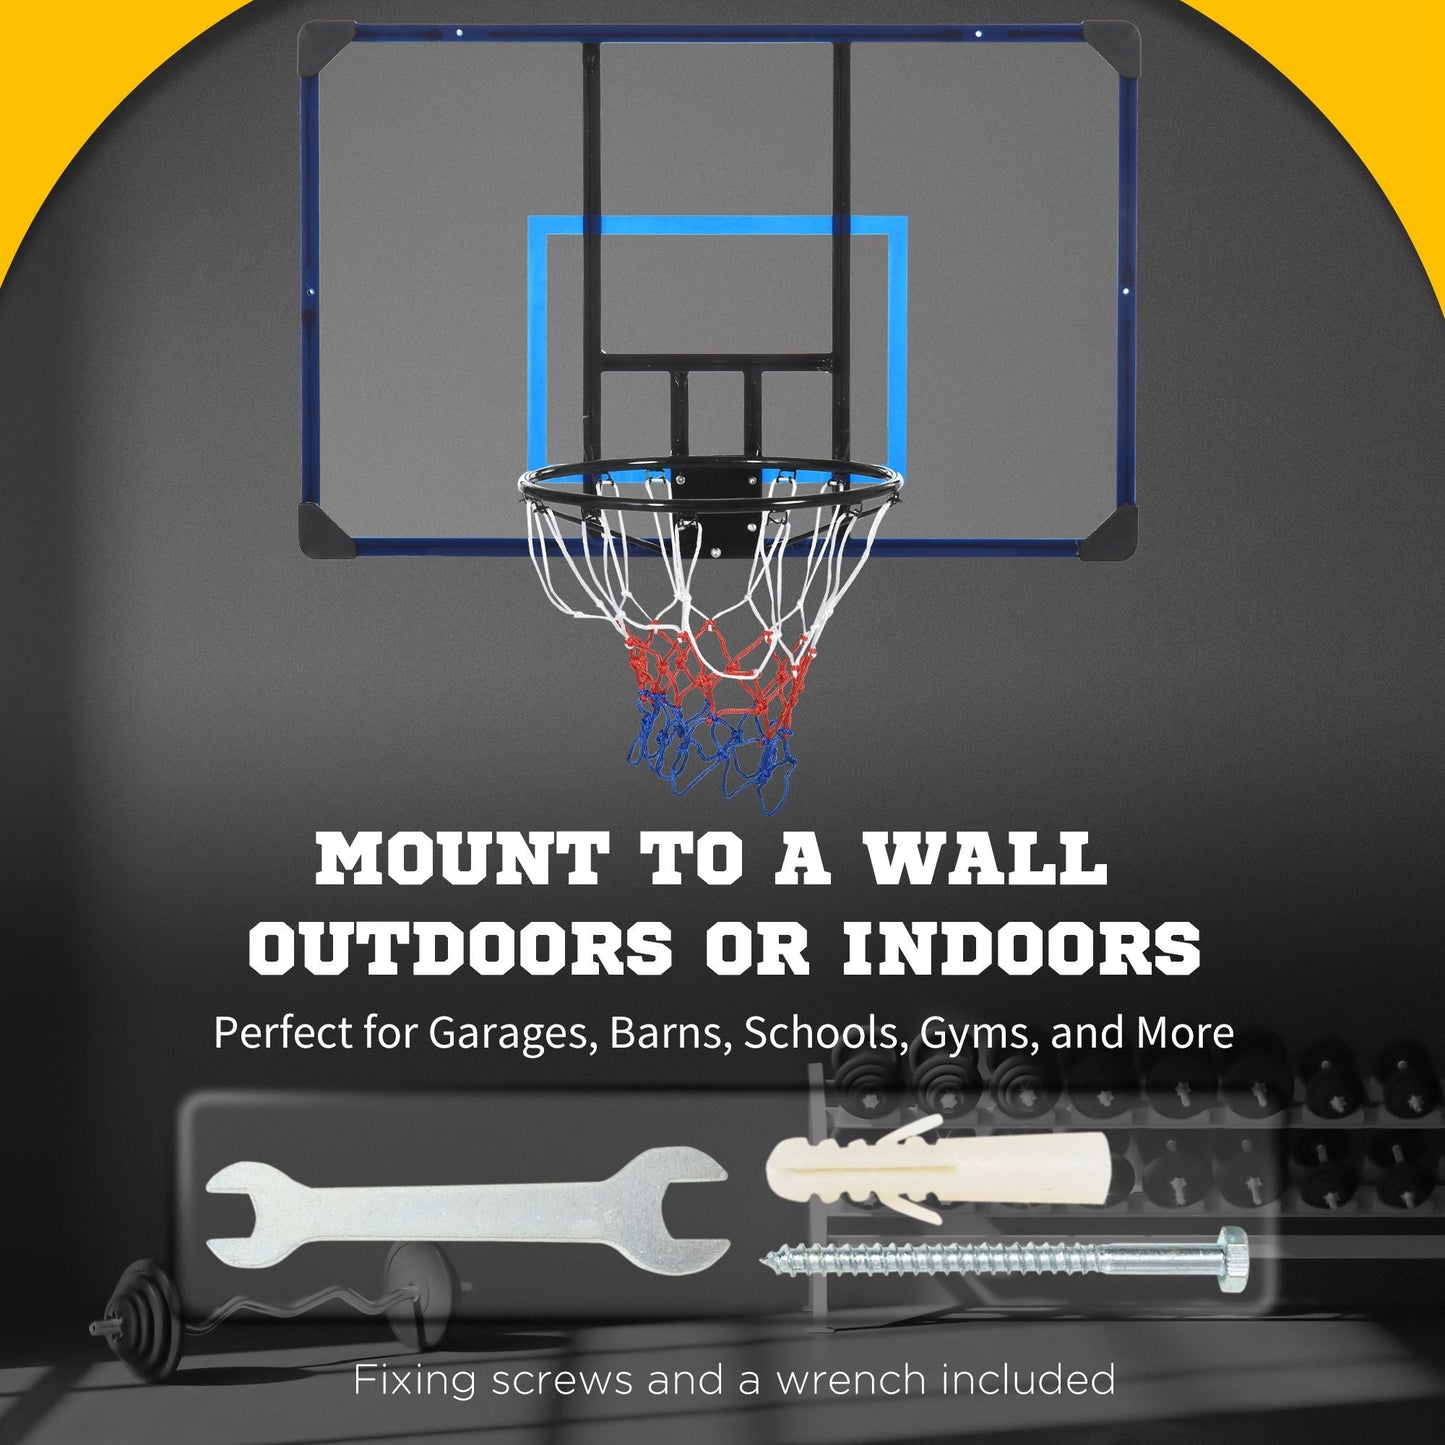 Wall Mounted Basketball Hoop, Mini Hoop with 45" x 29" Shatter Proof Backboard, Durable Rim and All-Weather Net for Indoor and Outdoor Use at Gallery Canada